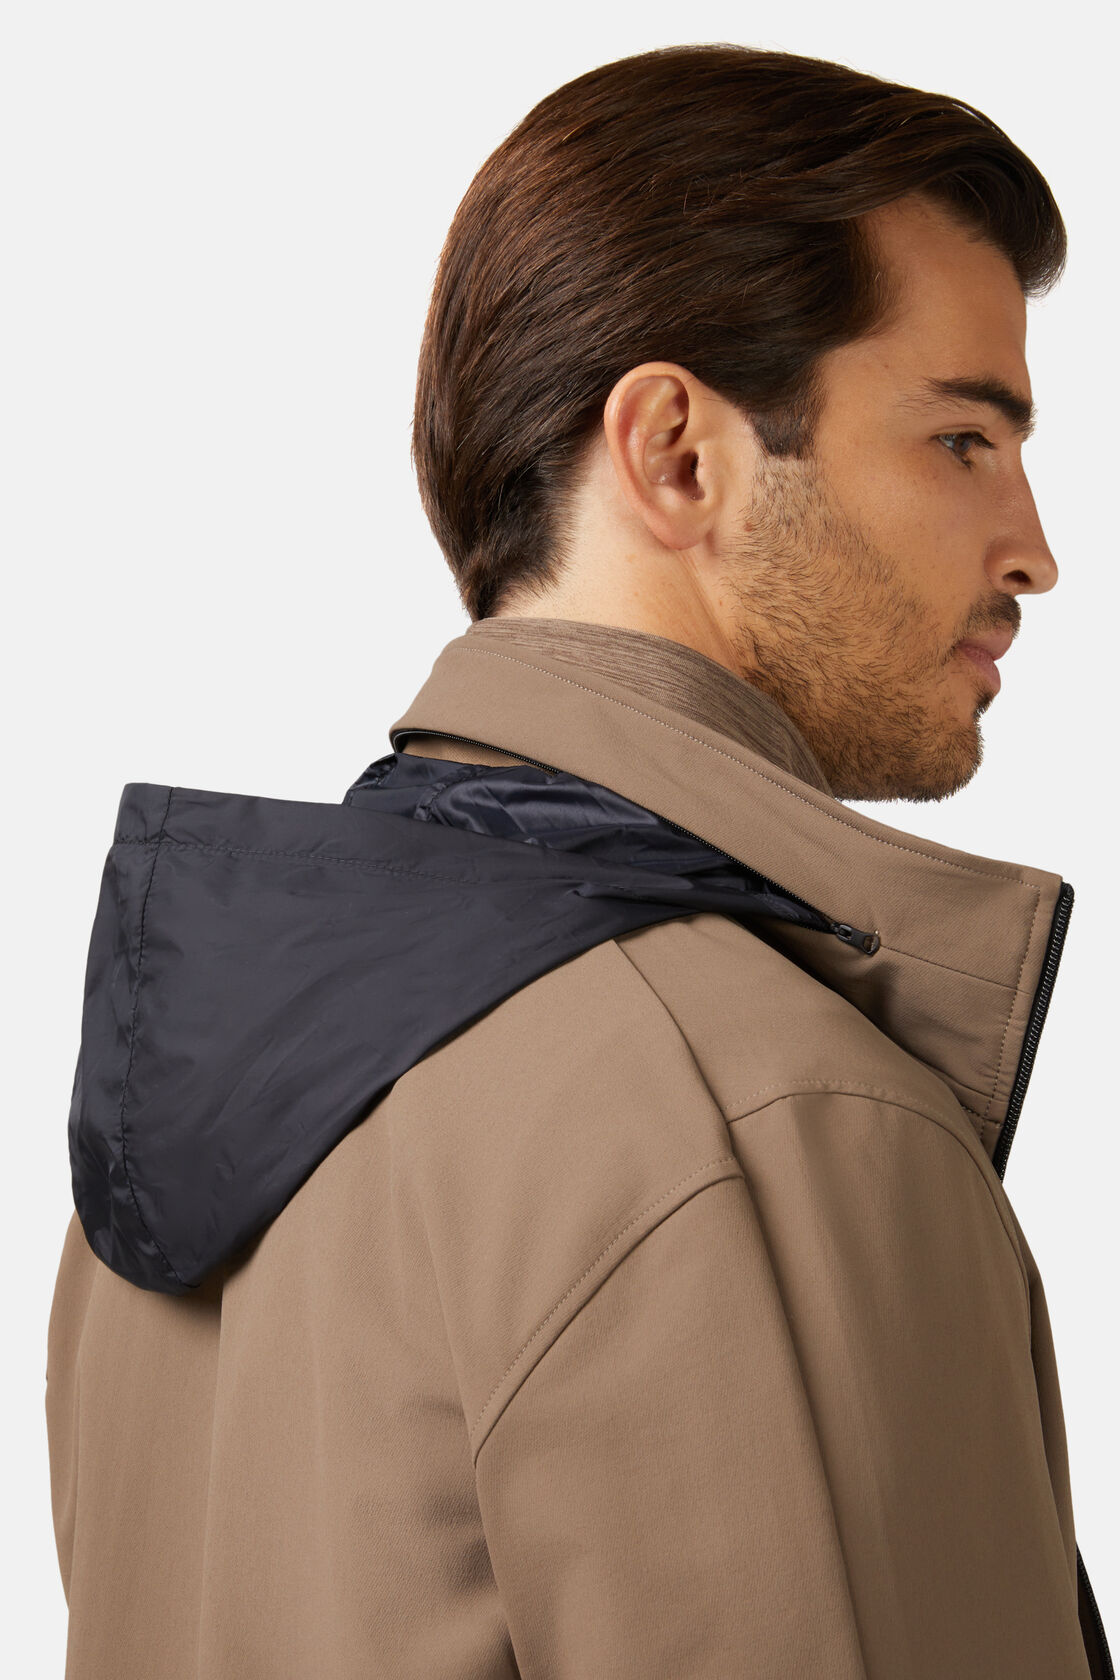 Windproof Jacket in B-Tech Stretch Nylon, Brown, hi-res